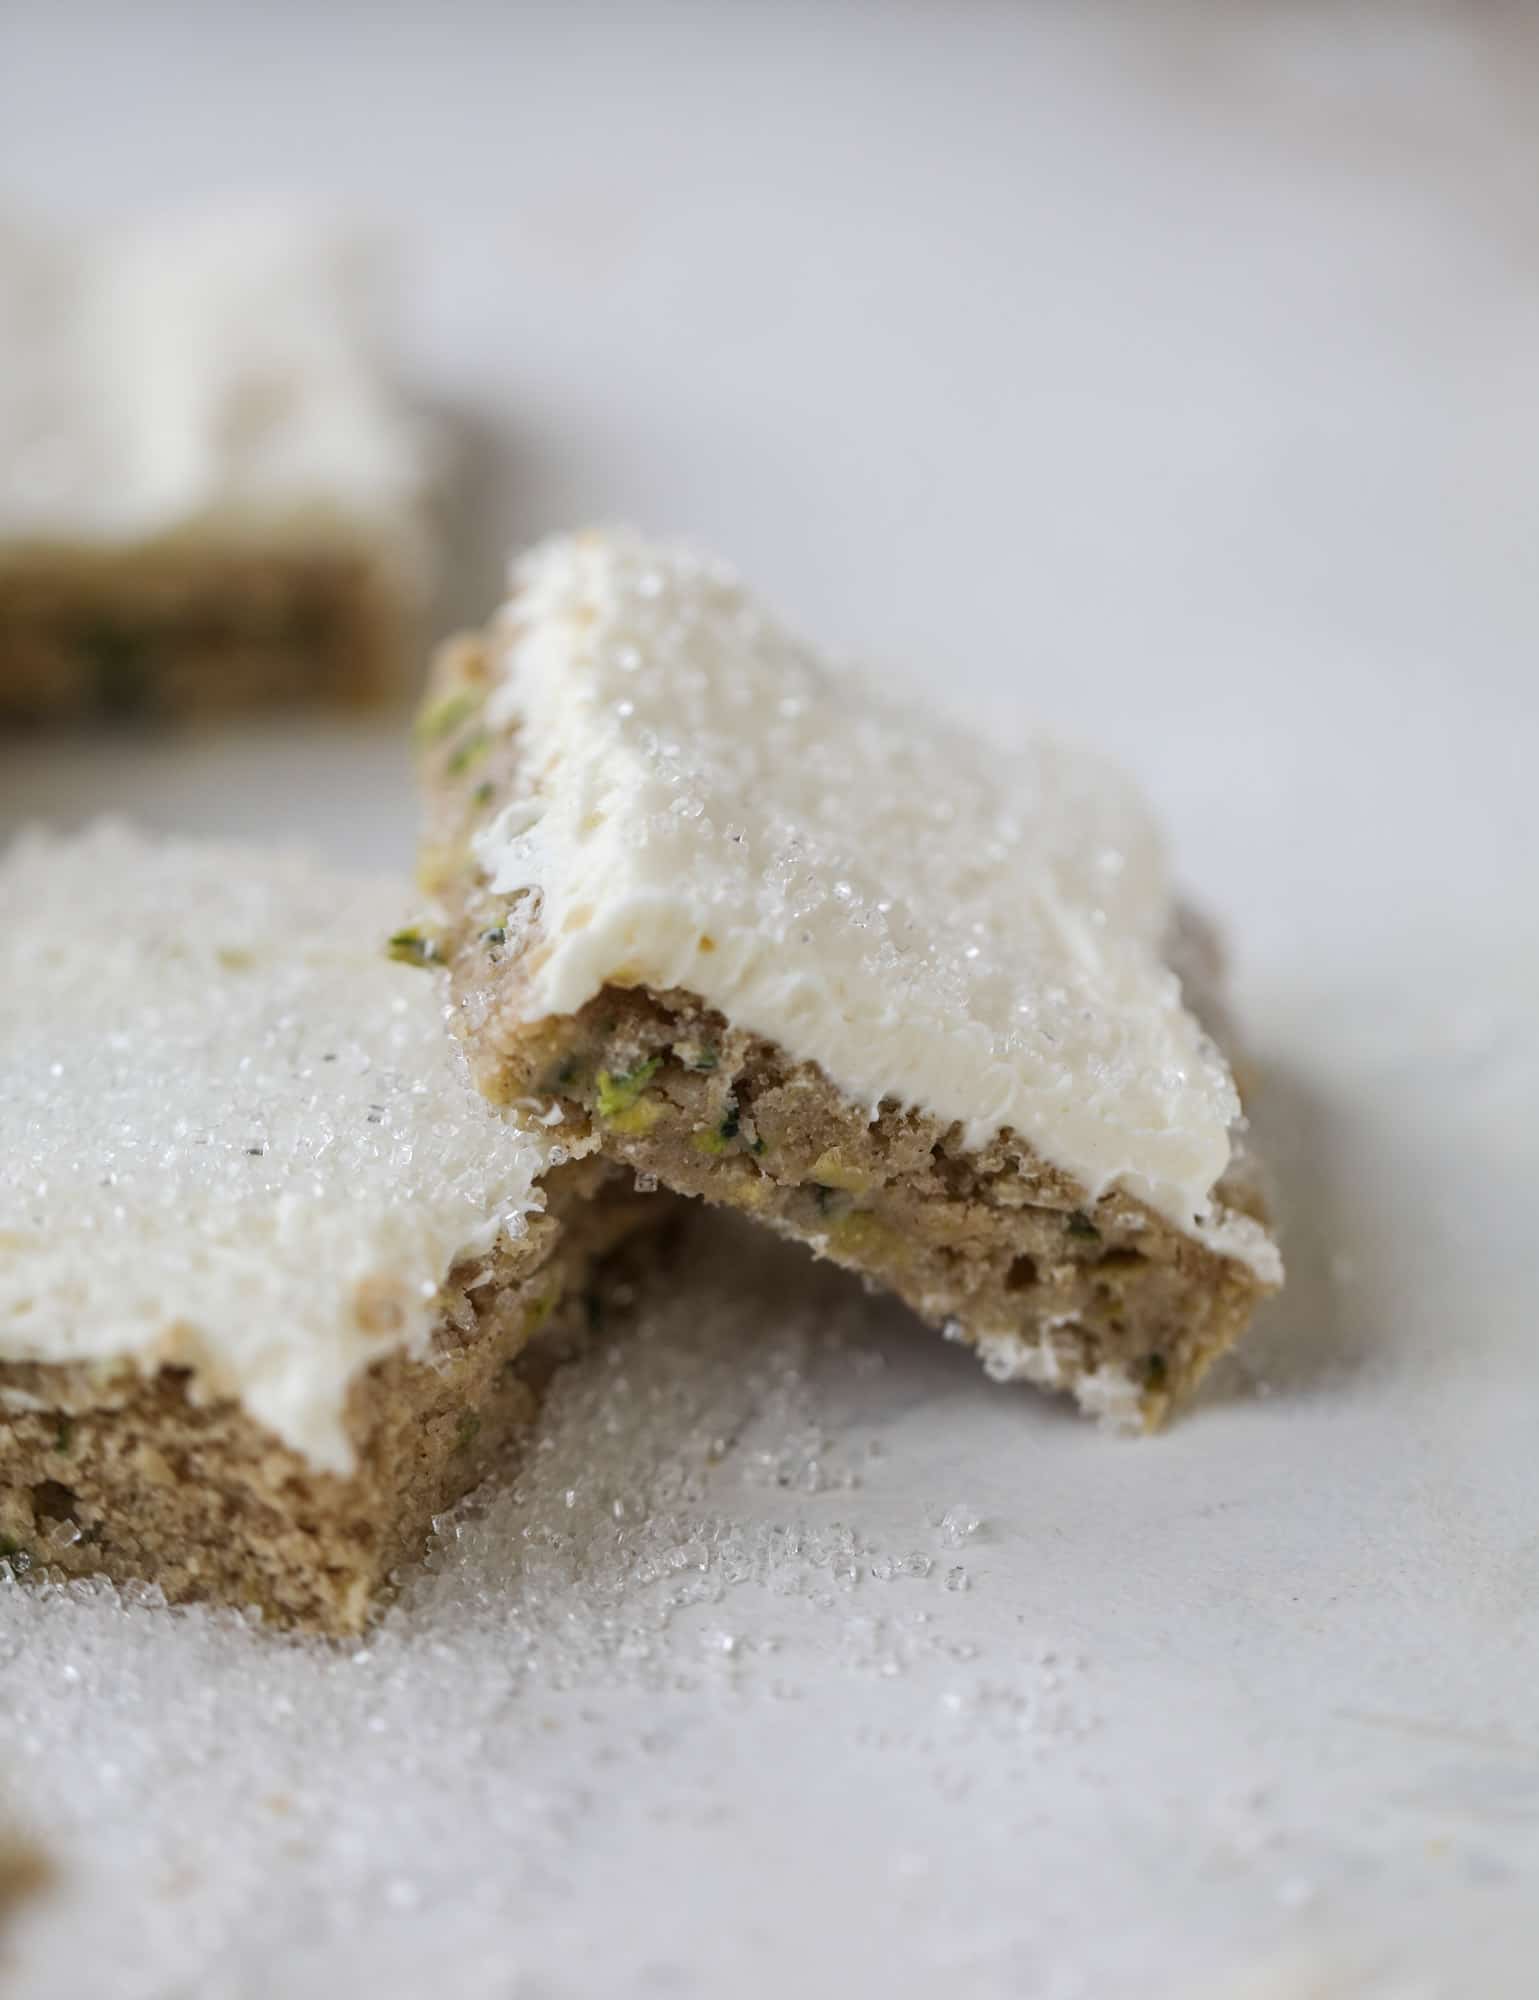 These zucchini bars with cream cheese icing are a fun twist on zucchini bread! Zucchini bars are super easy to make, have a little spice and a lot of flavor, topped with the creamiest cream cheese frosting. Delicious and simple! I howsweeteats.com #zucchini #bars #cream #cheese #icing #dessert